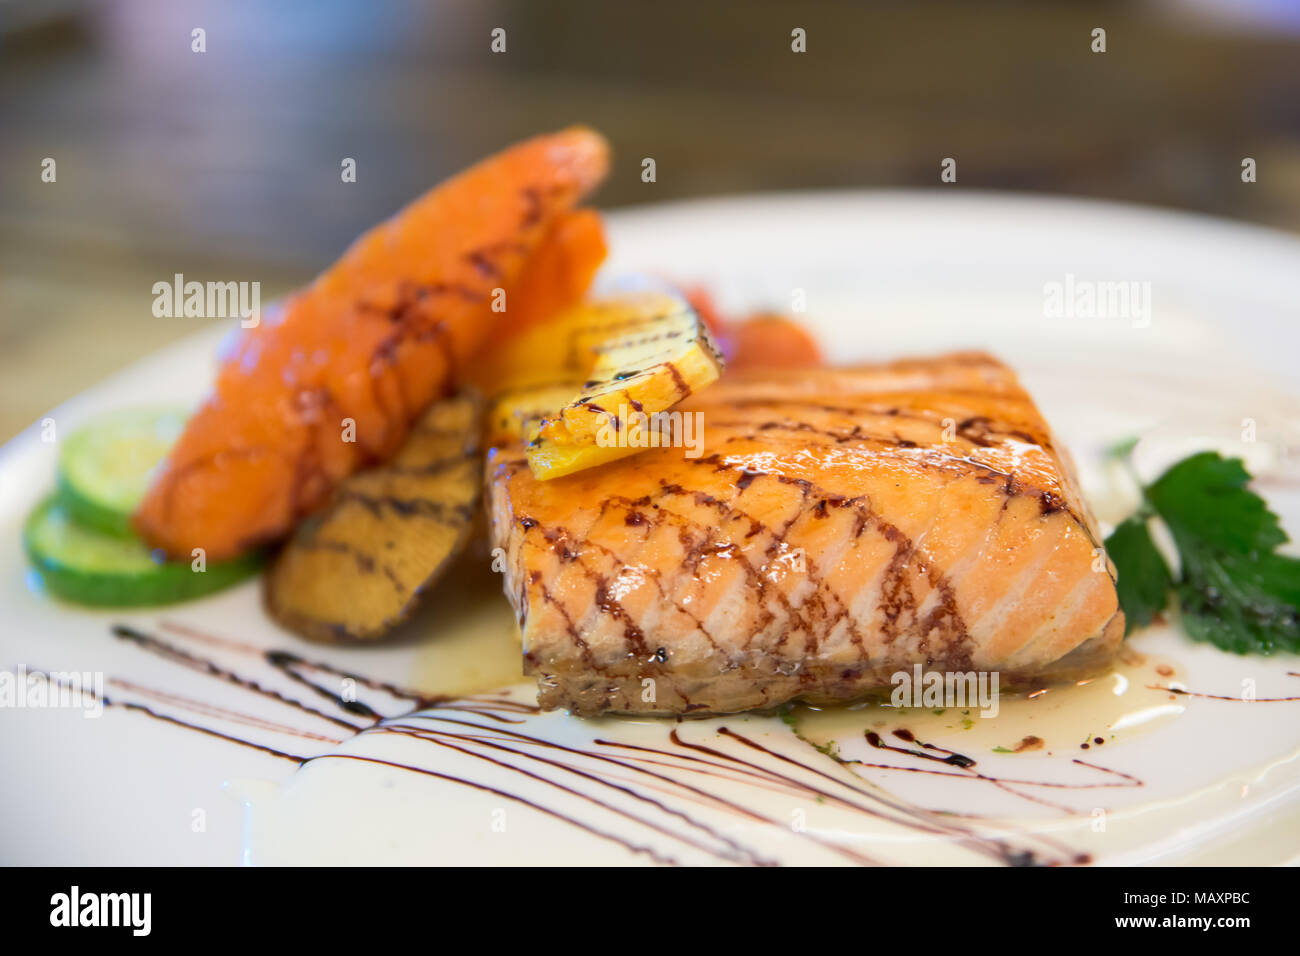 Grilled salmon steak and vegetables in white dish at Japanese food restaurant. Stock Photo